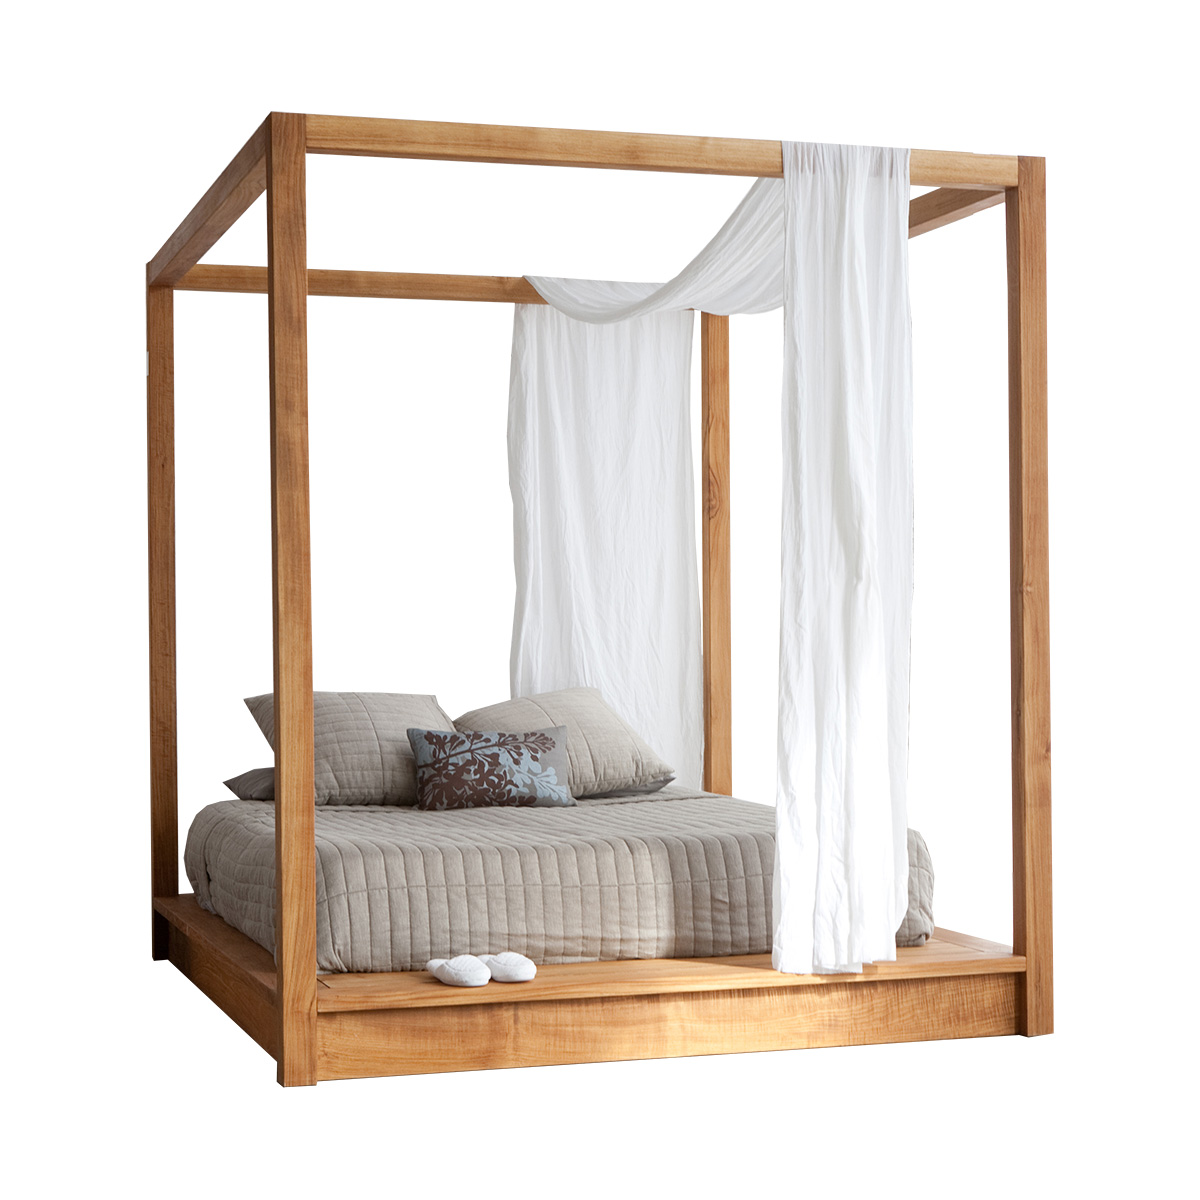 PCH Series Canopy Platform Bed